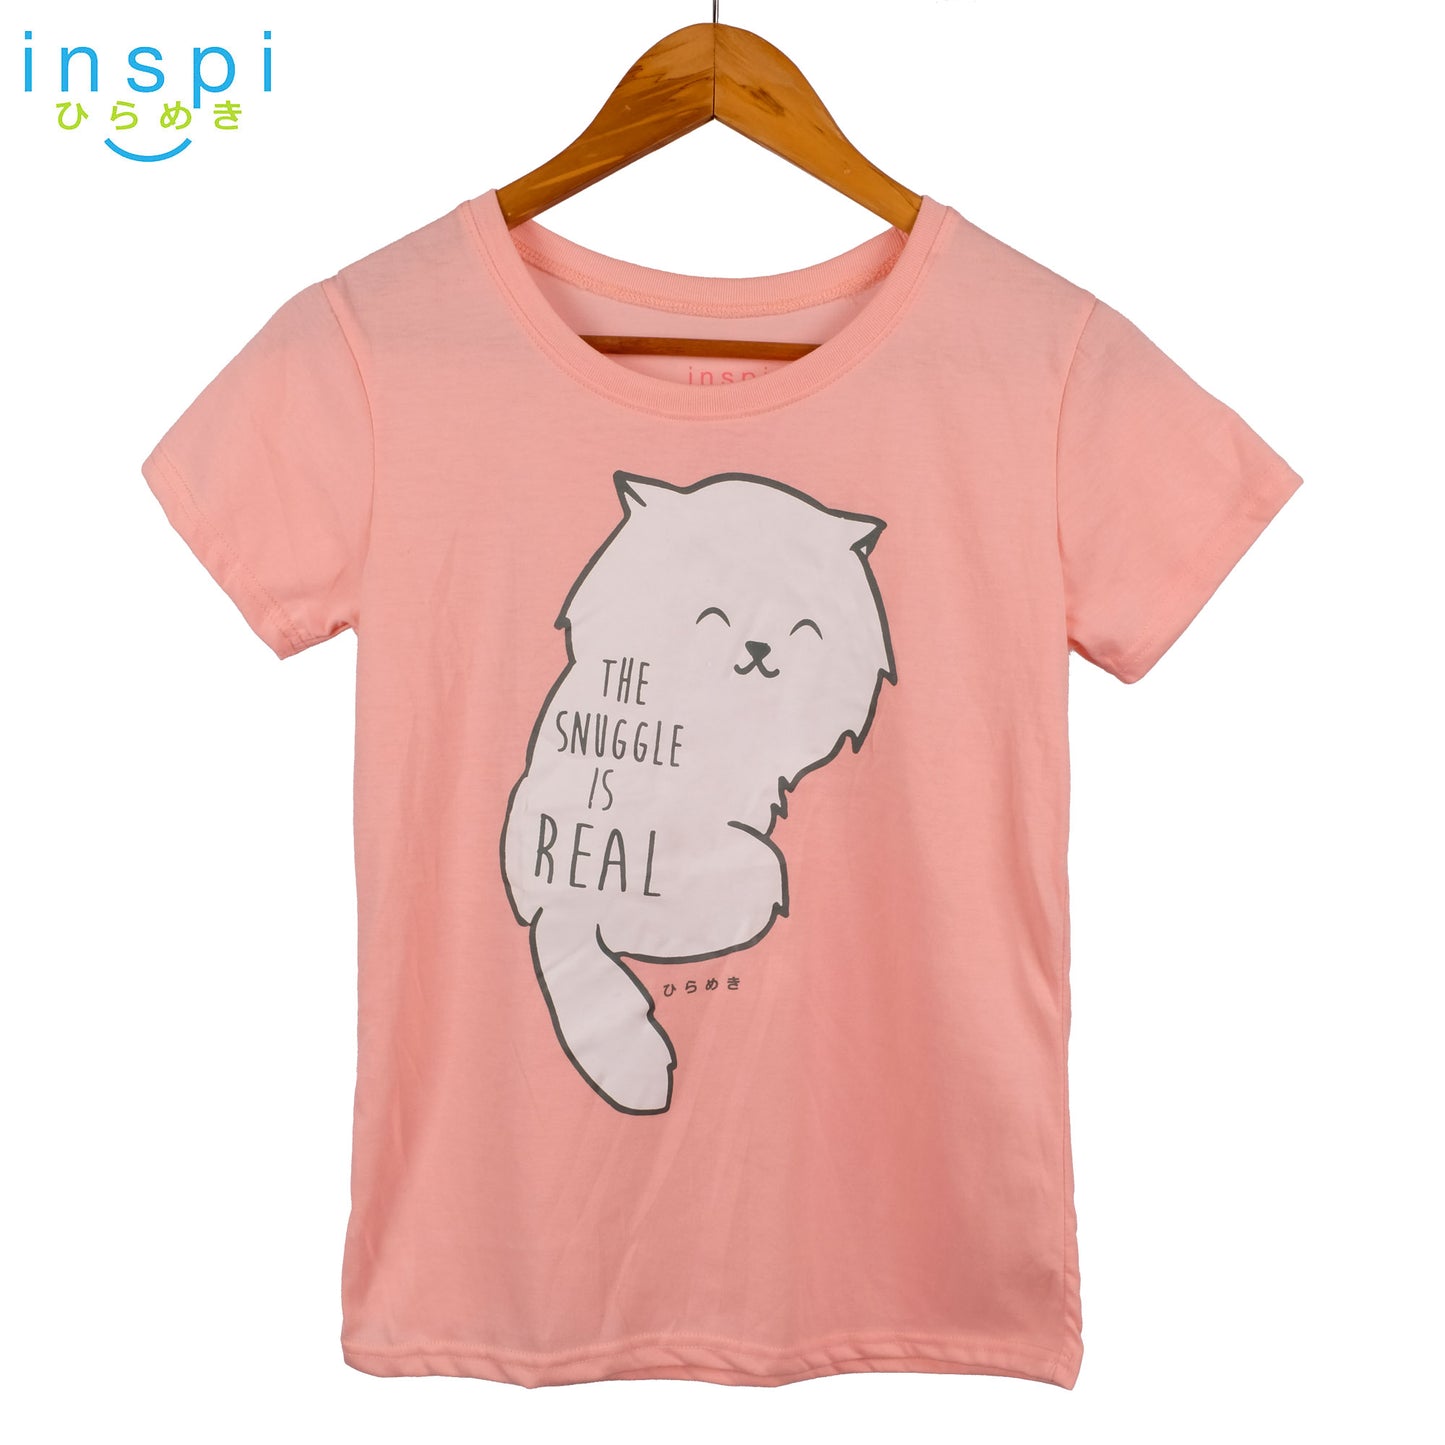 INSPI Tees Ladies Loose Fit Snuggle is Real Graphic Tshirt